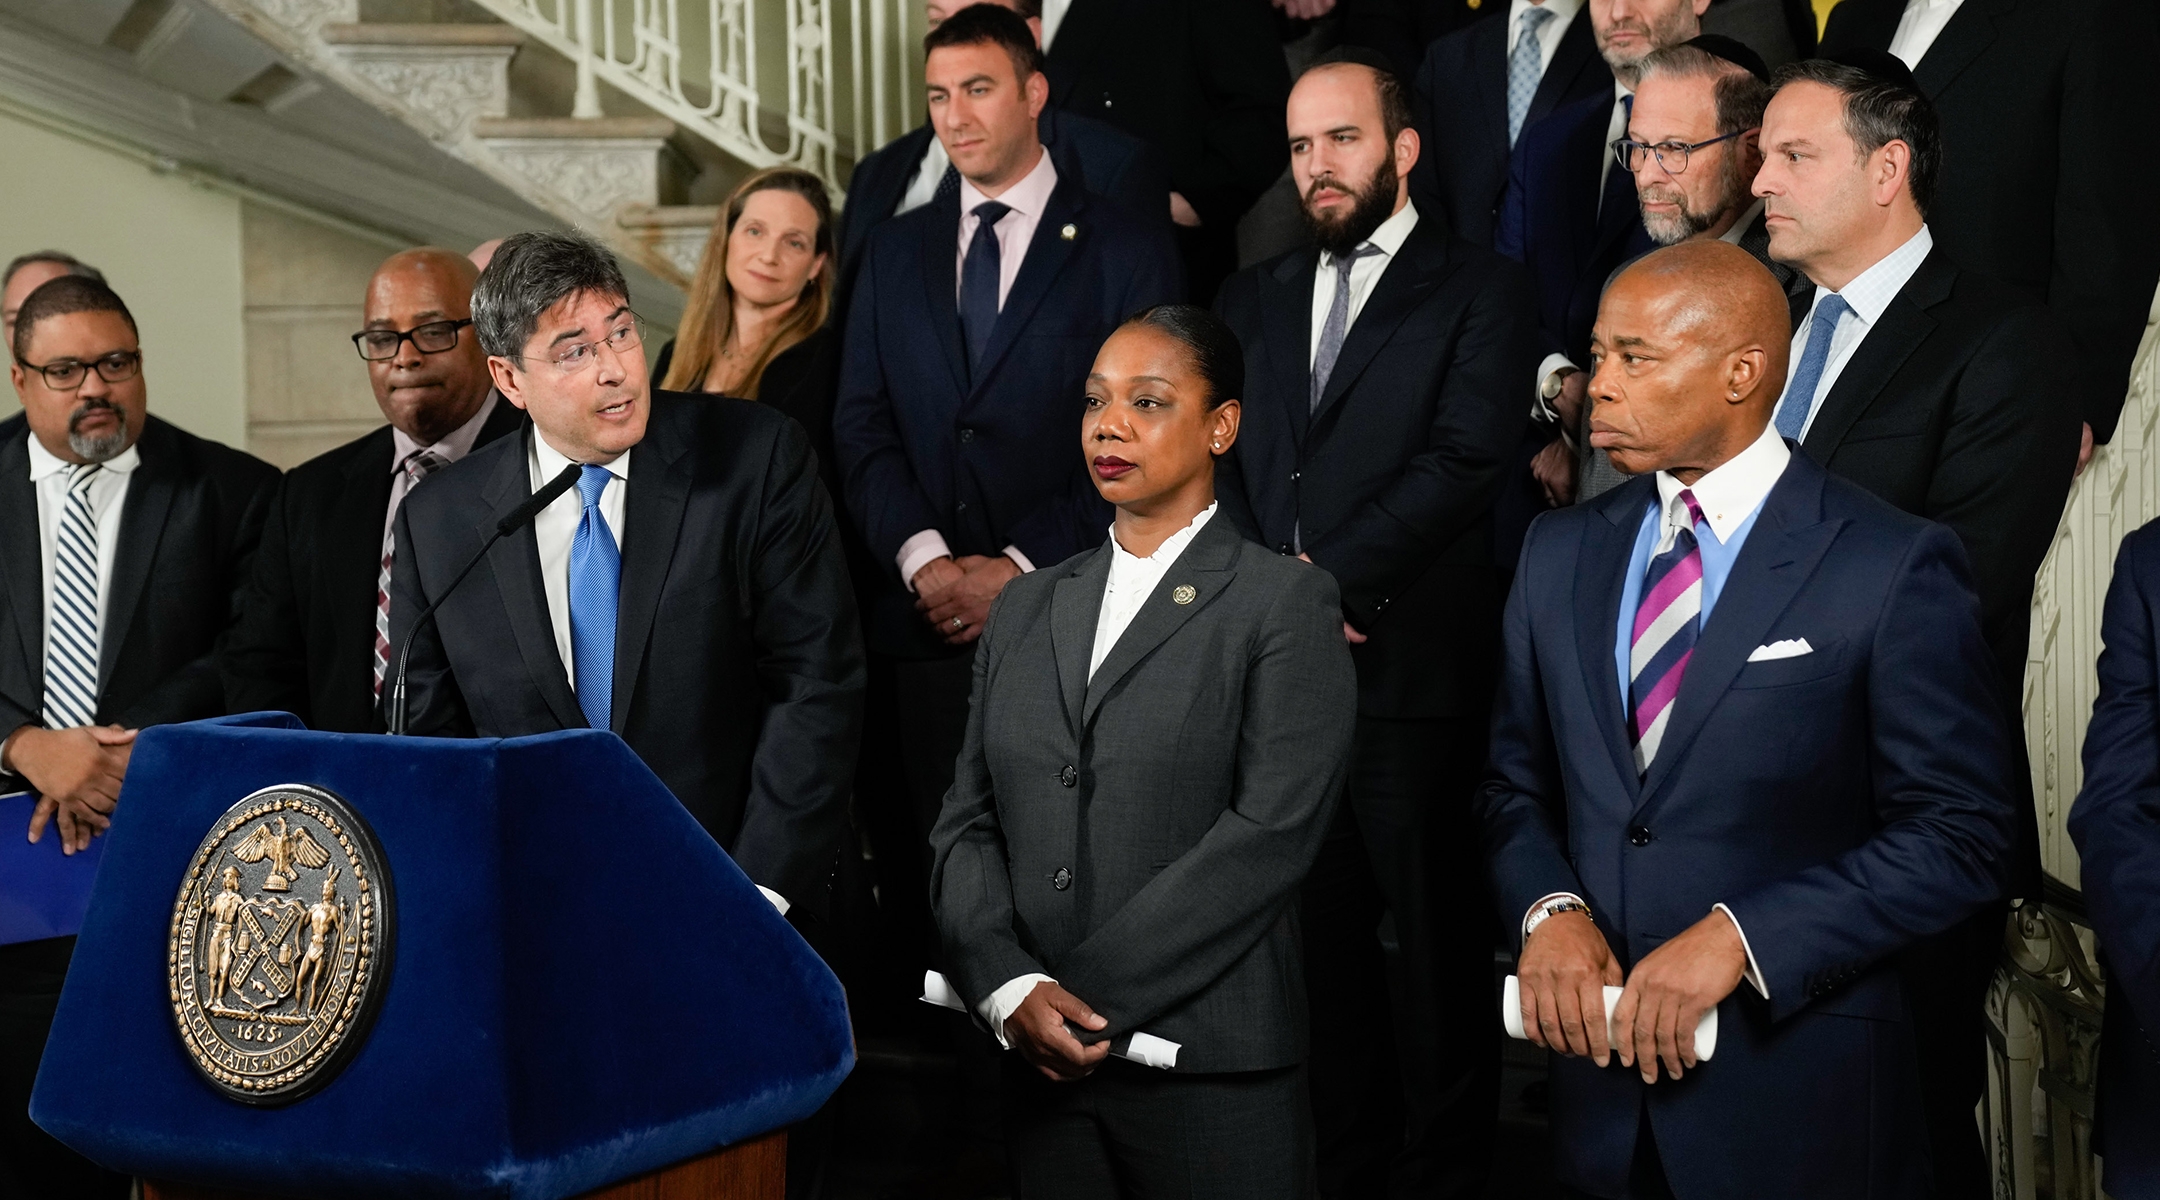 Eric Goldstein, CEO of UJA-Federation of New York; Keechant Sewell, New York City Police Commissioner, and Mayor Eric Adams at a news conference at City Hall discussing the arrest of two suspects plotting attacks on synagogues, Nov. 21, 2022.